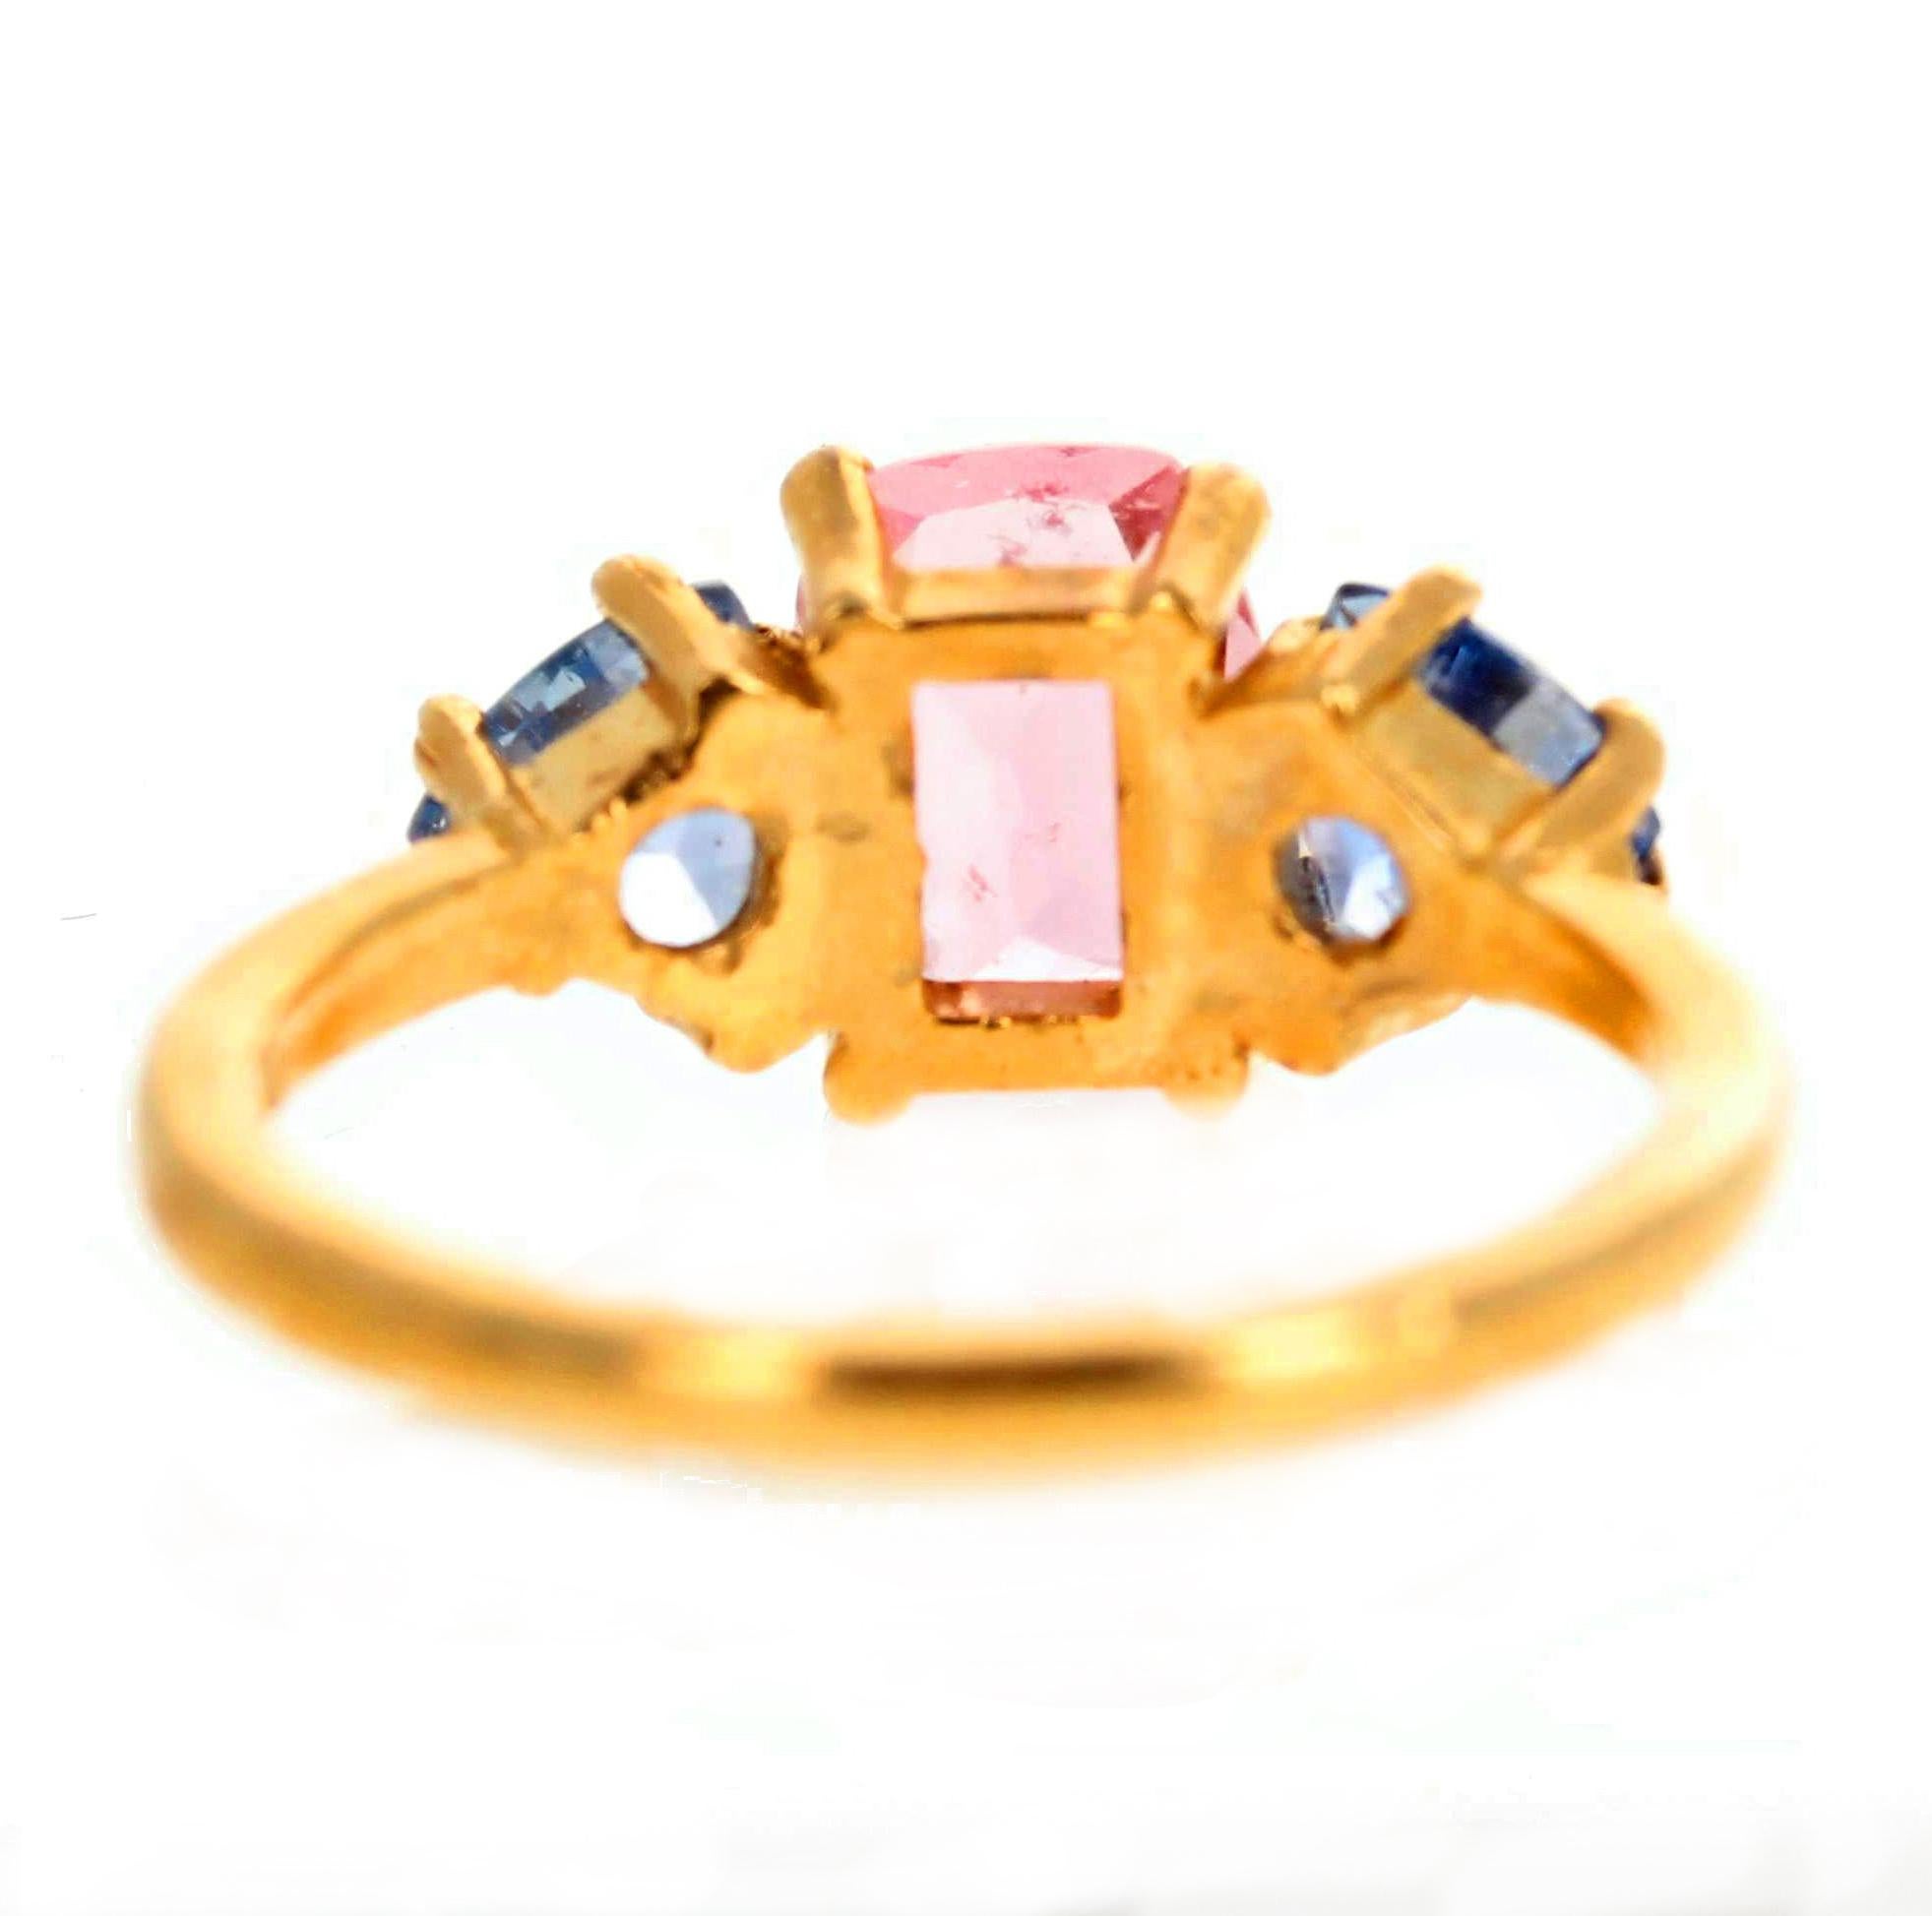 Gorgeous Sri Lankan pink Tourmaline - 1.35 Carats - 8 mm x 6 mm approximately - enhanced with two matching sparkling blue Sapphire trillions set in this lovely 14K yellow gold ring size 7 sizable. 